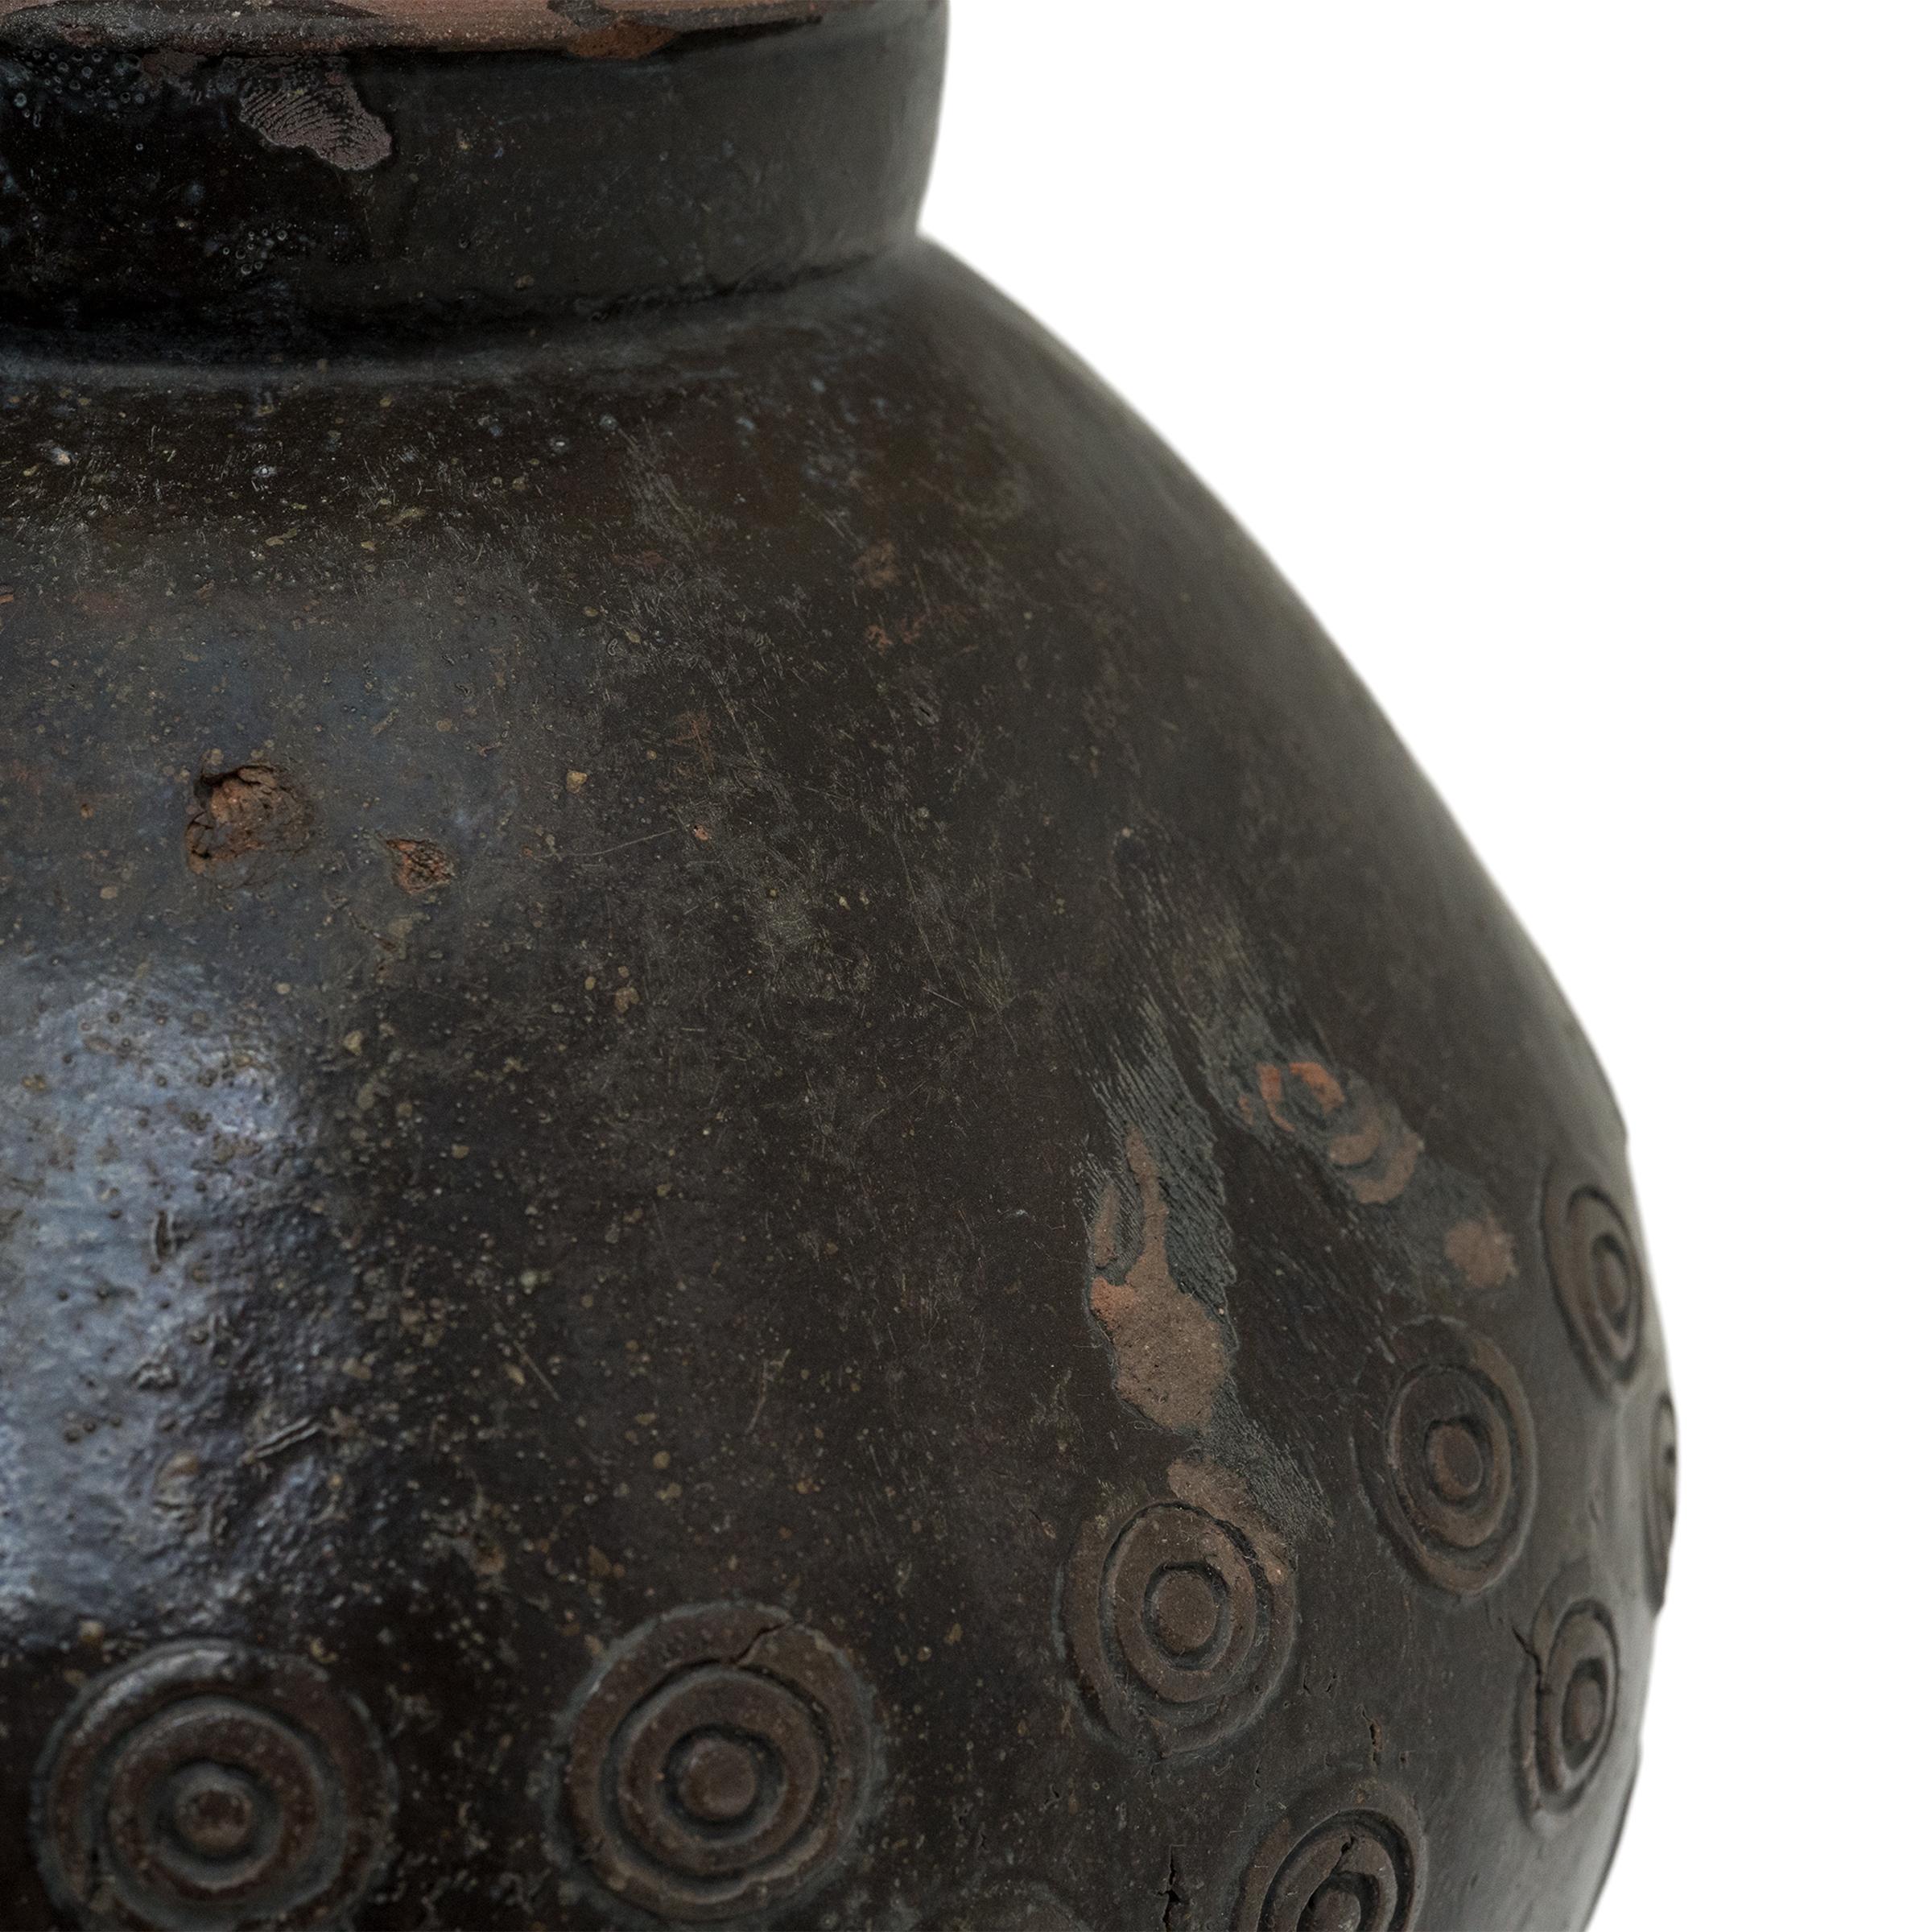 Glazed Stamped Chinese Yunnan Pot, c. 1800